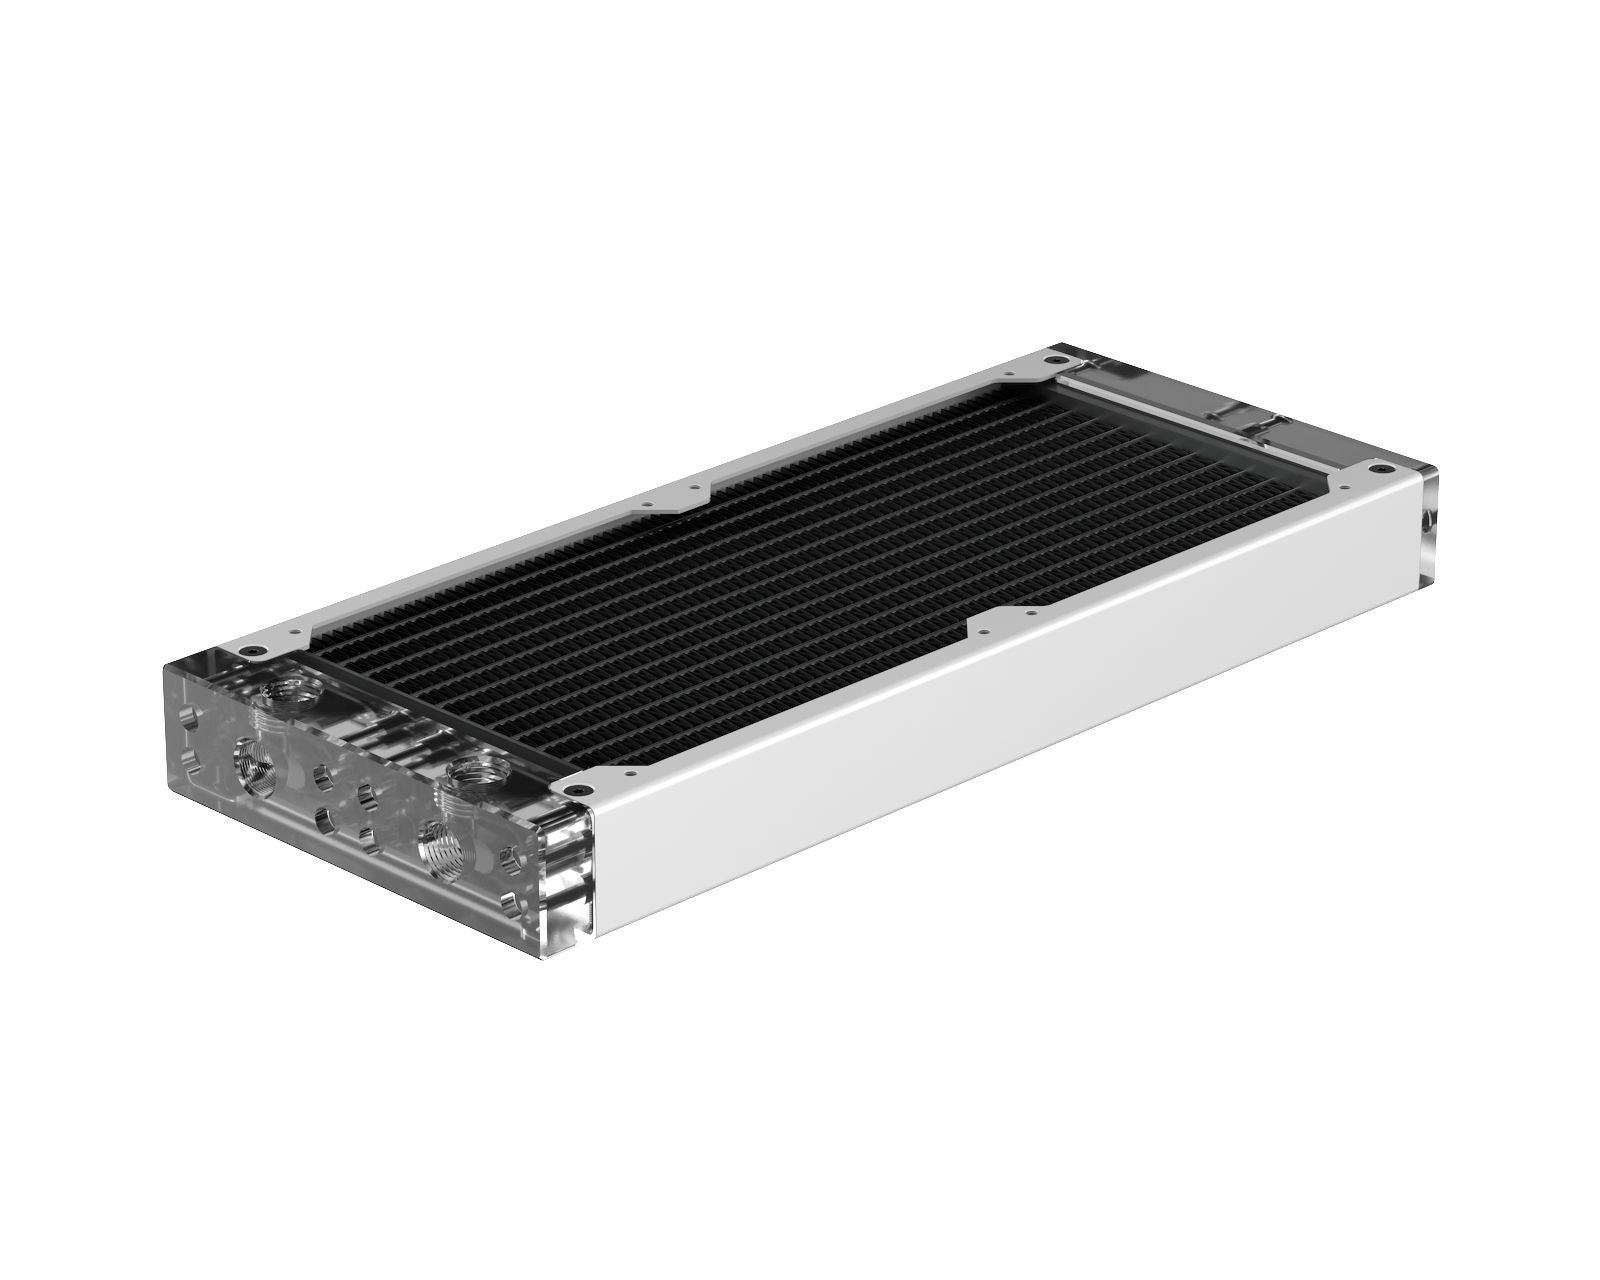 PrimoChill 240SL (30mm) EXIMO Modular Radiator, Clear Acrylic, 2x120mm, Dual Fan (R-SL-A24) Available in 20+ Colors, Assembled in USA and Custom Watercooling Loop Ready - Sky White